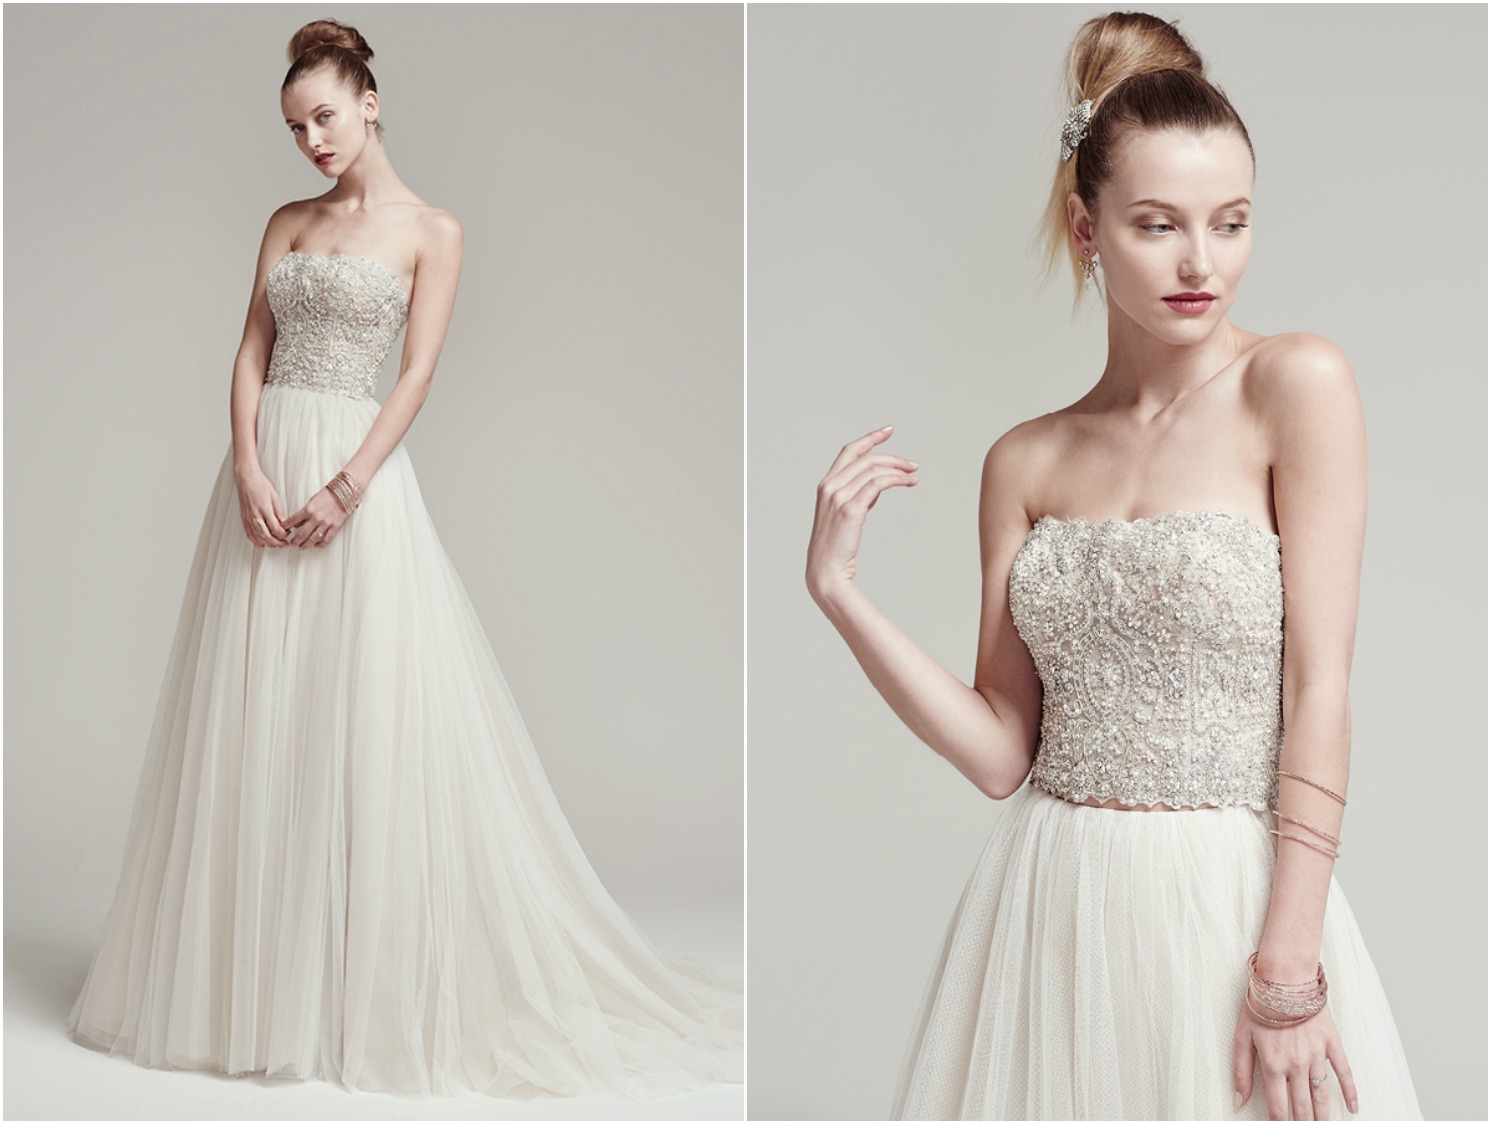 Bead encrusted strapless bodice sparkles with Swarovski crystals. Finished with crystal buttons over zipper closure. Full tulle A-line skirt with zipper closure.

<a href="https://www.maggiesottero.com/sottero-and-midgley/rosella-shardea/9961" target="_blank">Sottero &amp; Midgley</a>